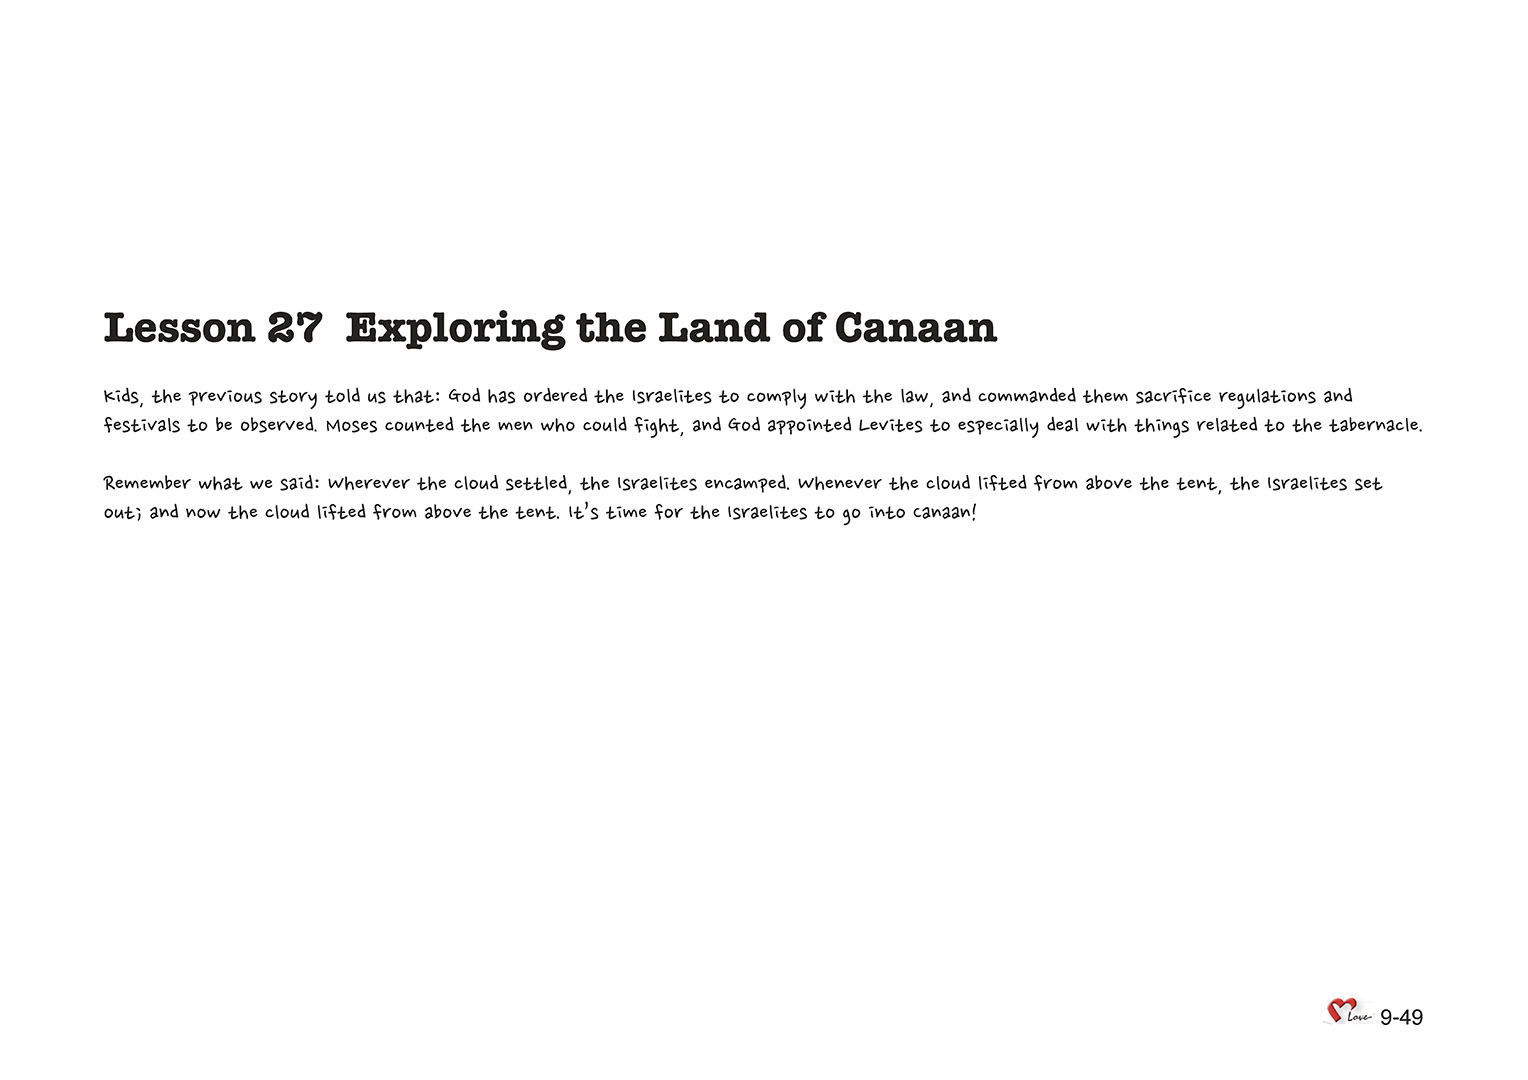 Chapter 9 - Lesson 27 - Exploring the Land of Canaan